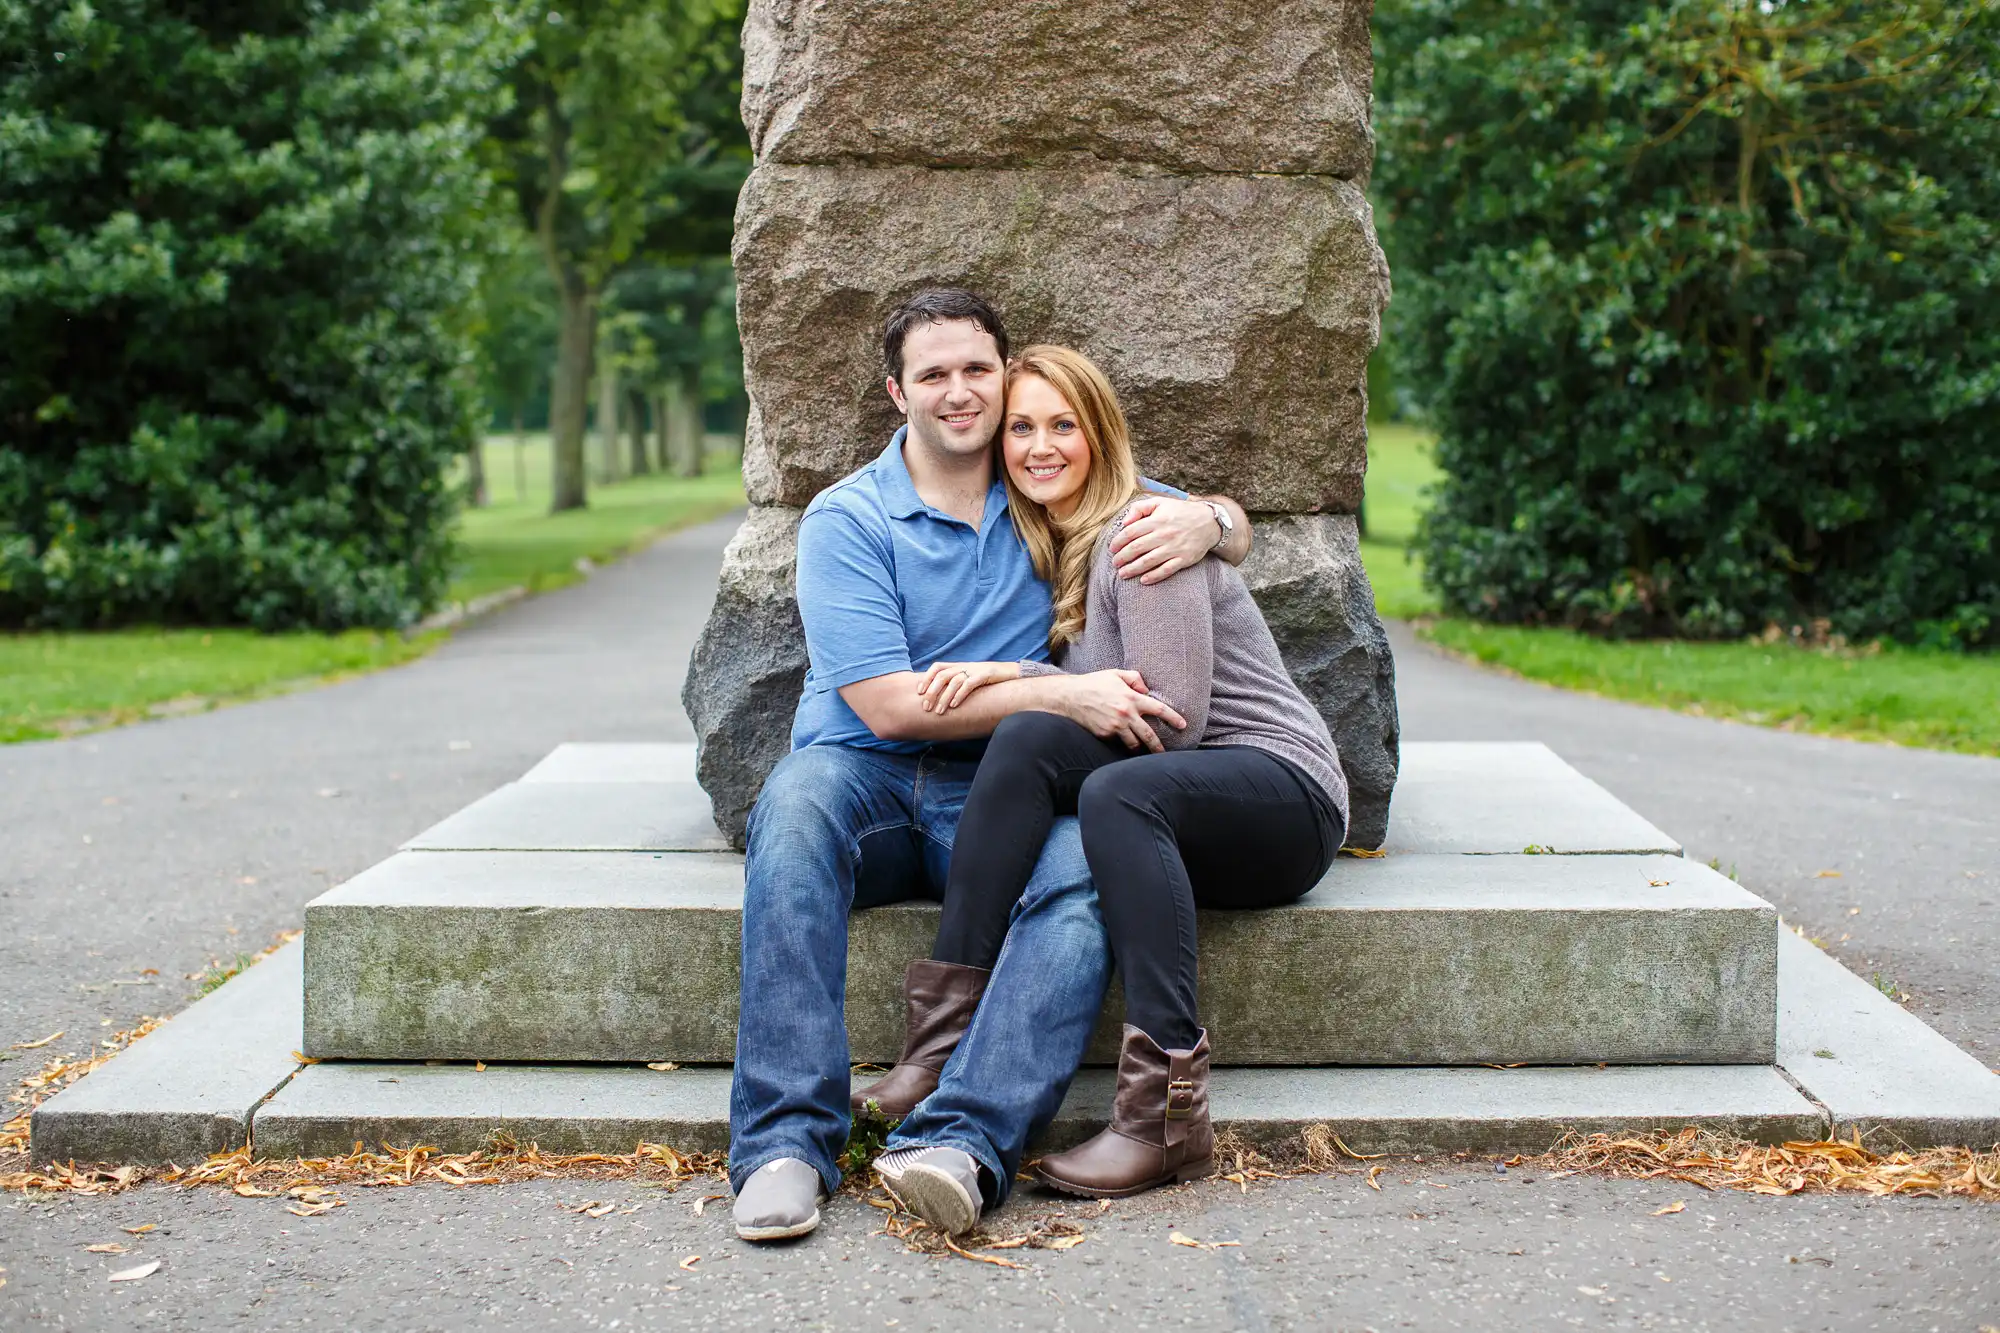 A couple sitting closely on the steps of a stone monument in a park, smiling at the camera.